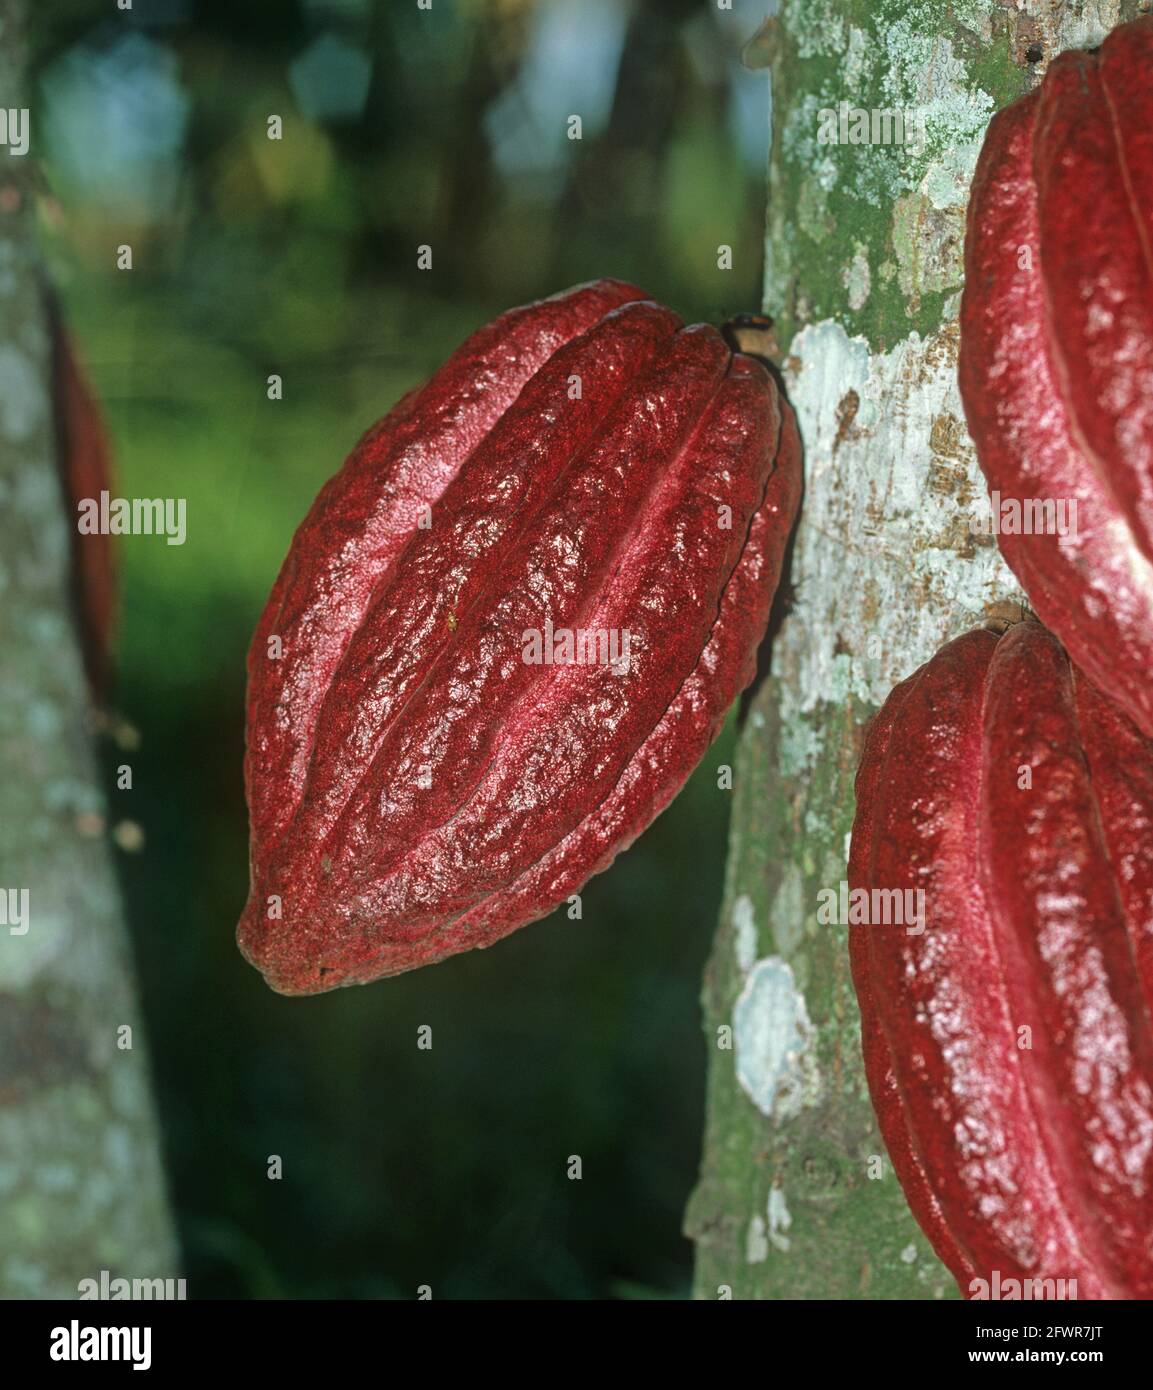 Mature cocoa pods (Theobroma cacao) on a tree in a Colombian plantation near Cali Stock Photo